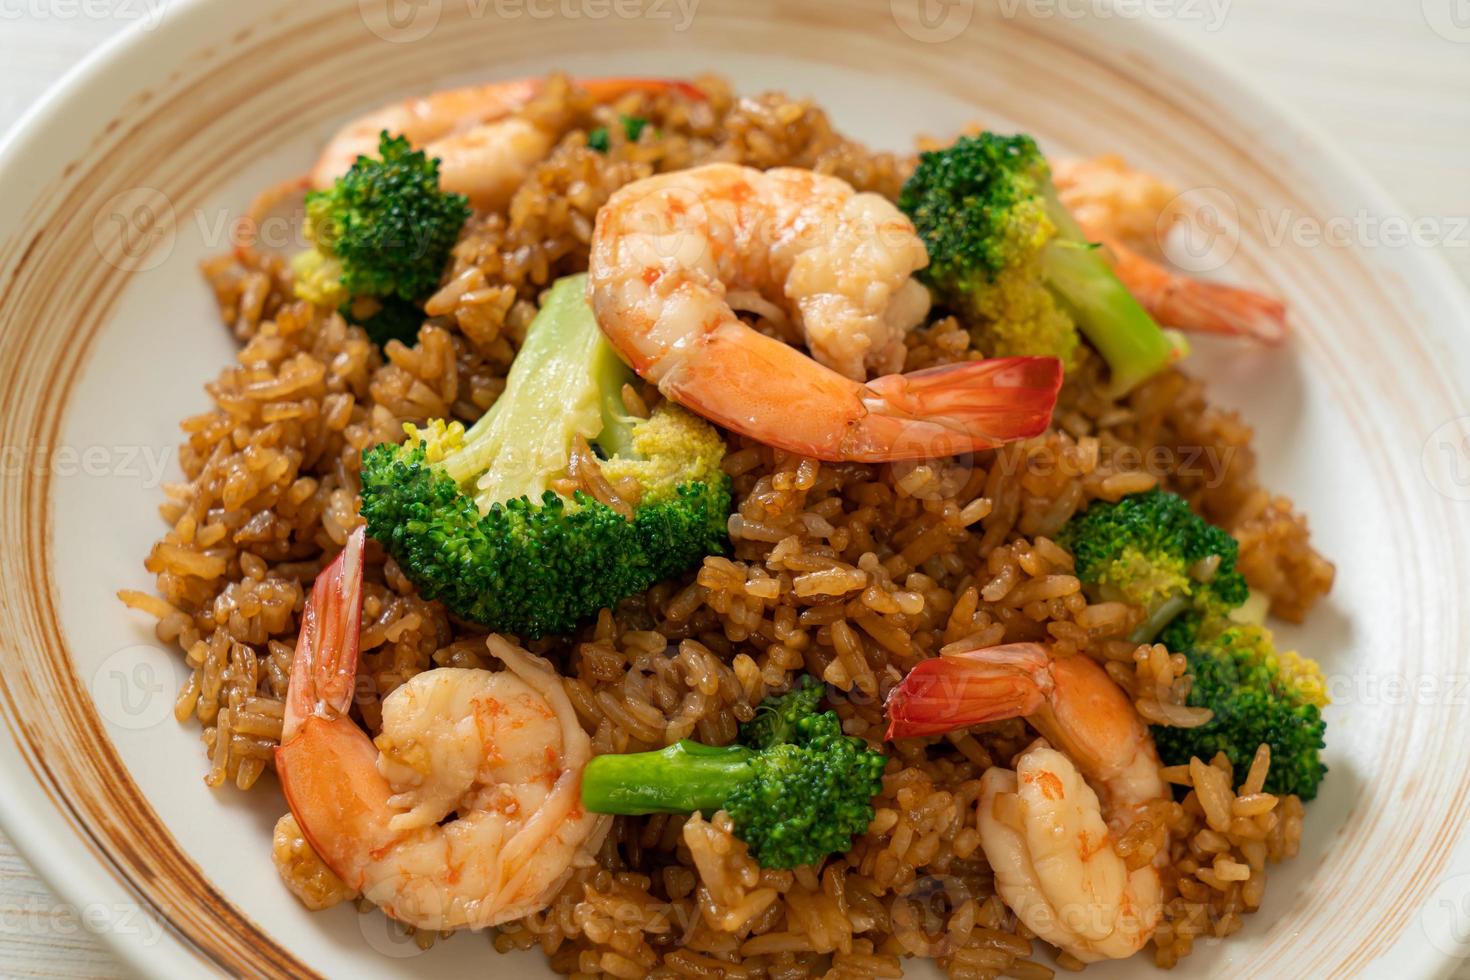 Fried rice with broccoli and shrimp - Homemade food style photo